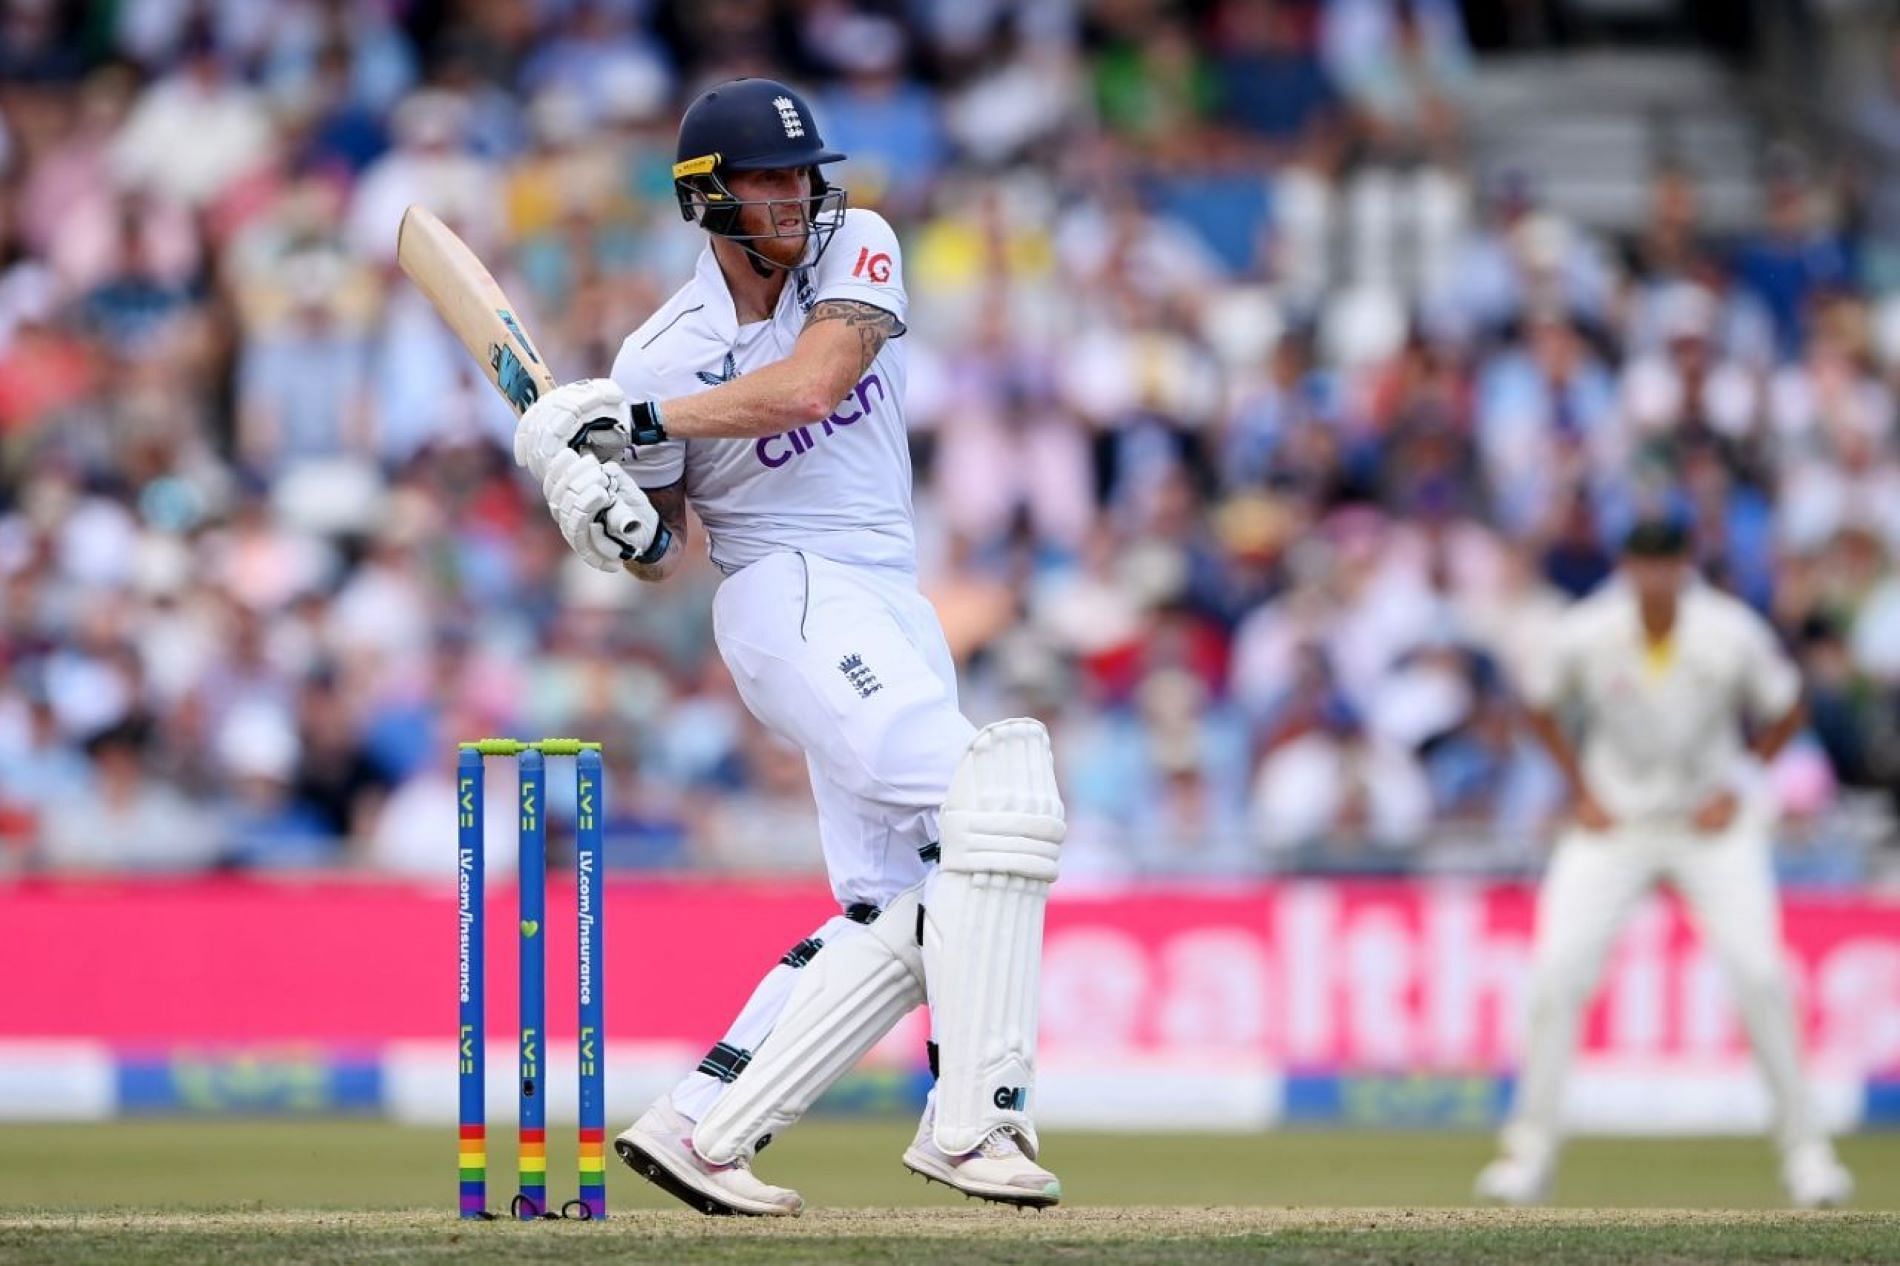 Ben Stokes saved England from the blushes again on Day 2